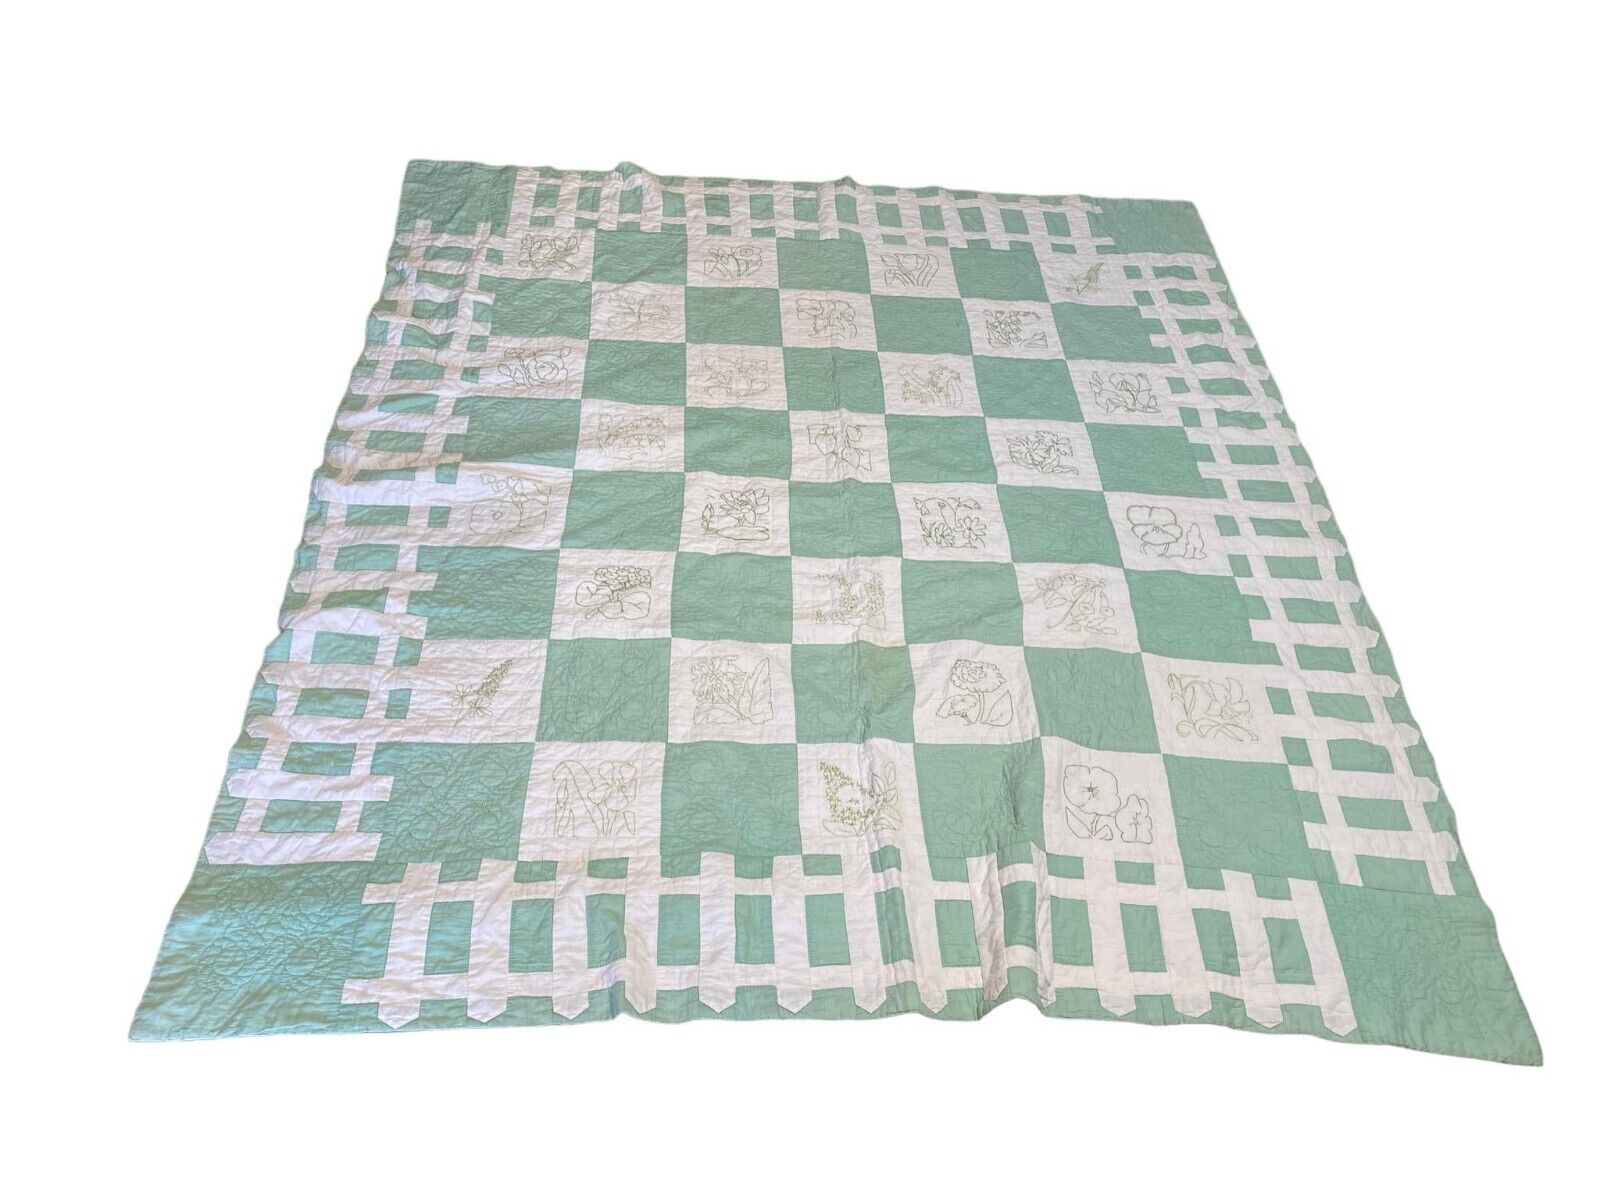 Vintage Embroidered Quilt Florals Green Borders Embroidery 83X74